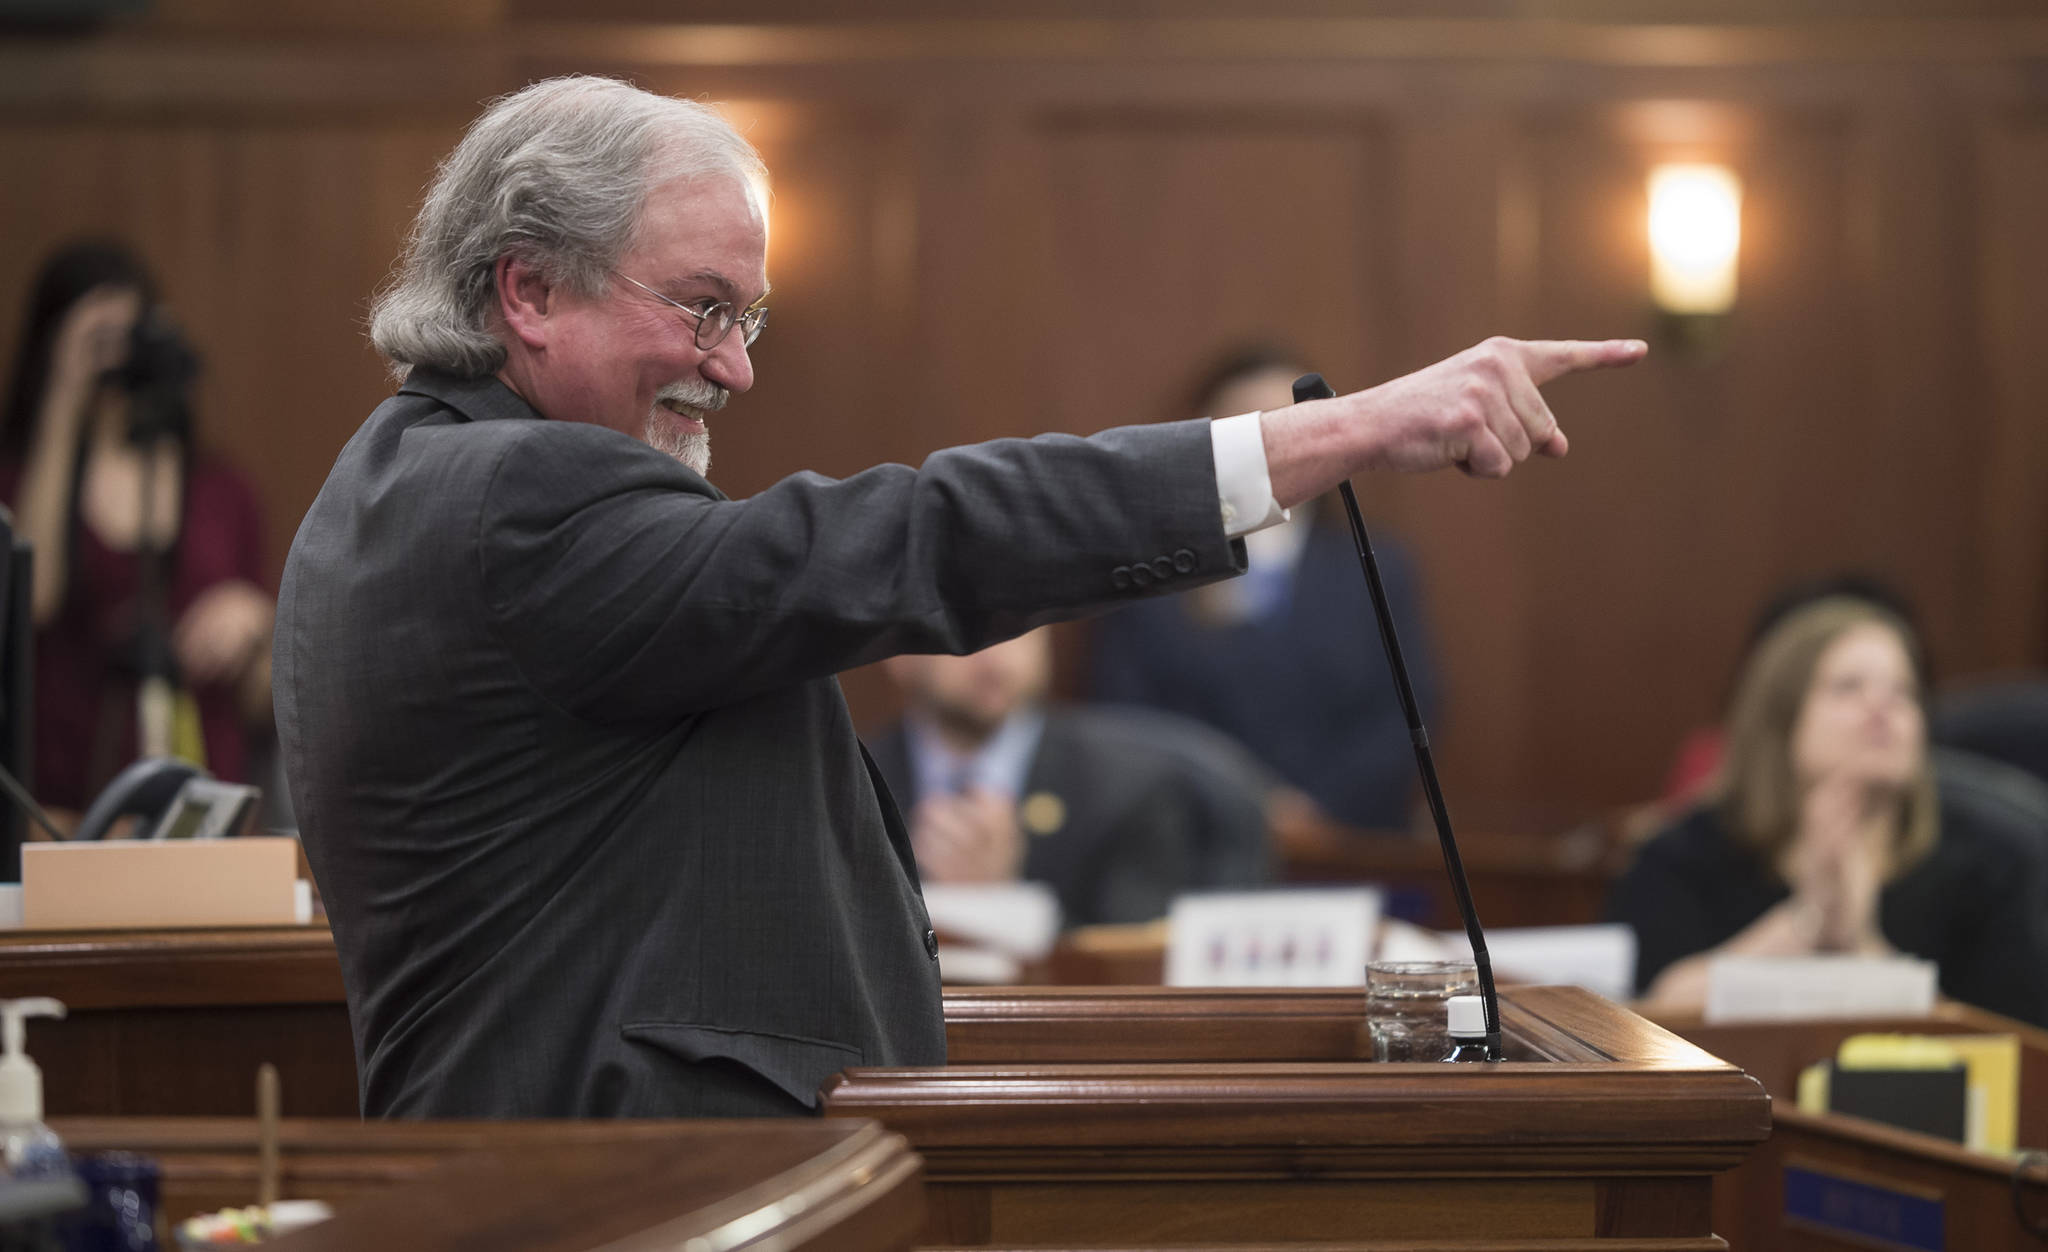 Alaska Supreme Court Chief Justice Craig Stowers calls out his staff sitting in the gallery during his State of the Judiciary address before a joint session of the Alaska Legislature at the Capitol on Wednesday, Feb. 7, 2018. (Michael Penn | Juneau Empire)